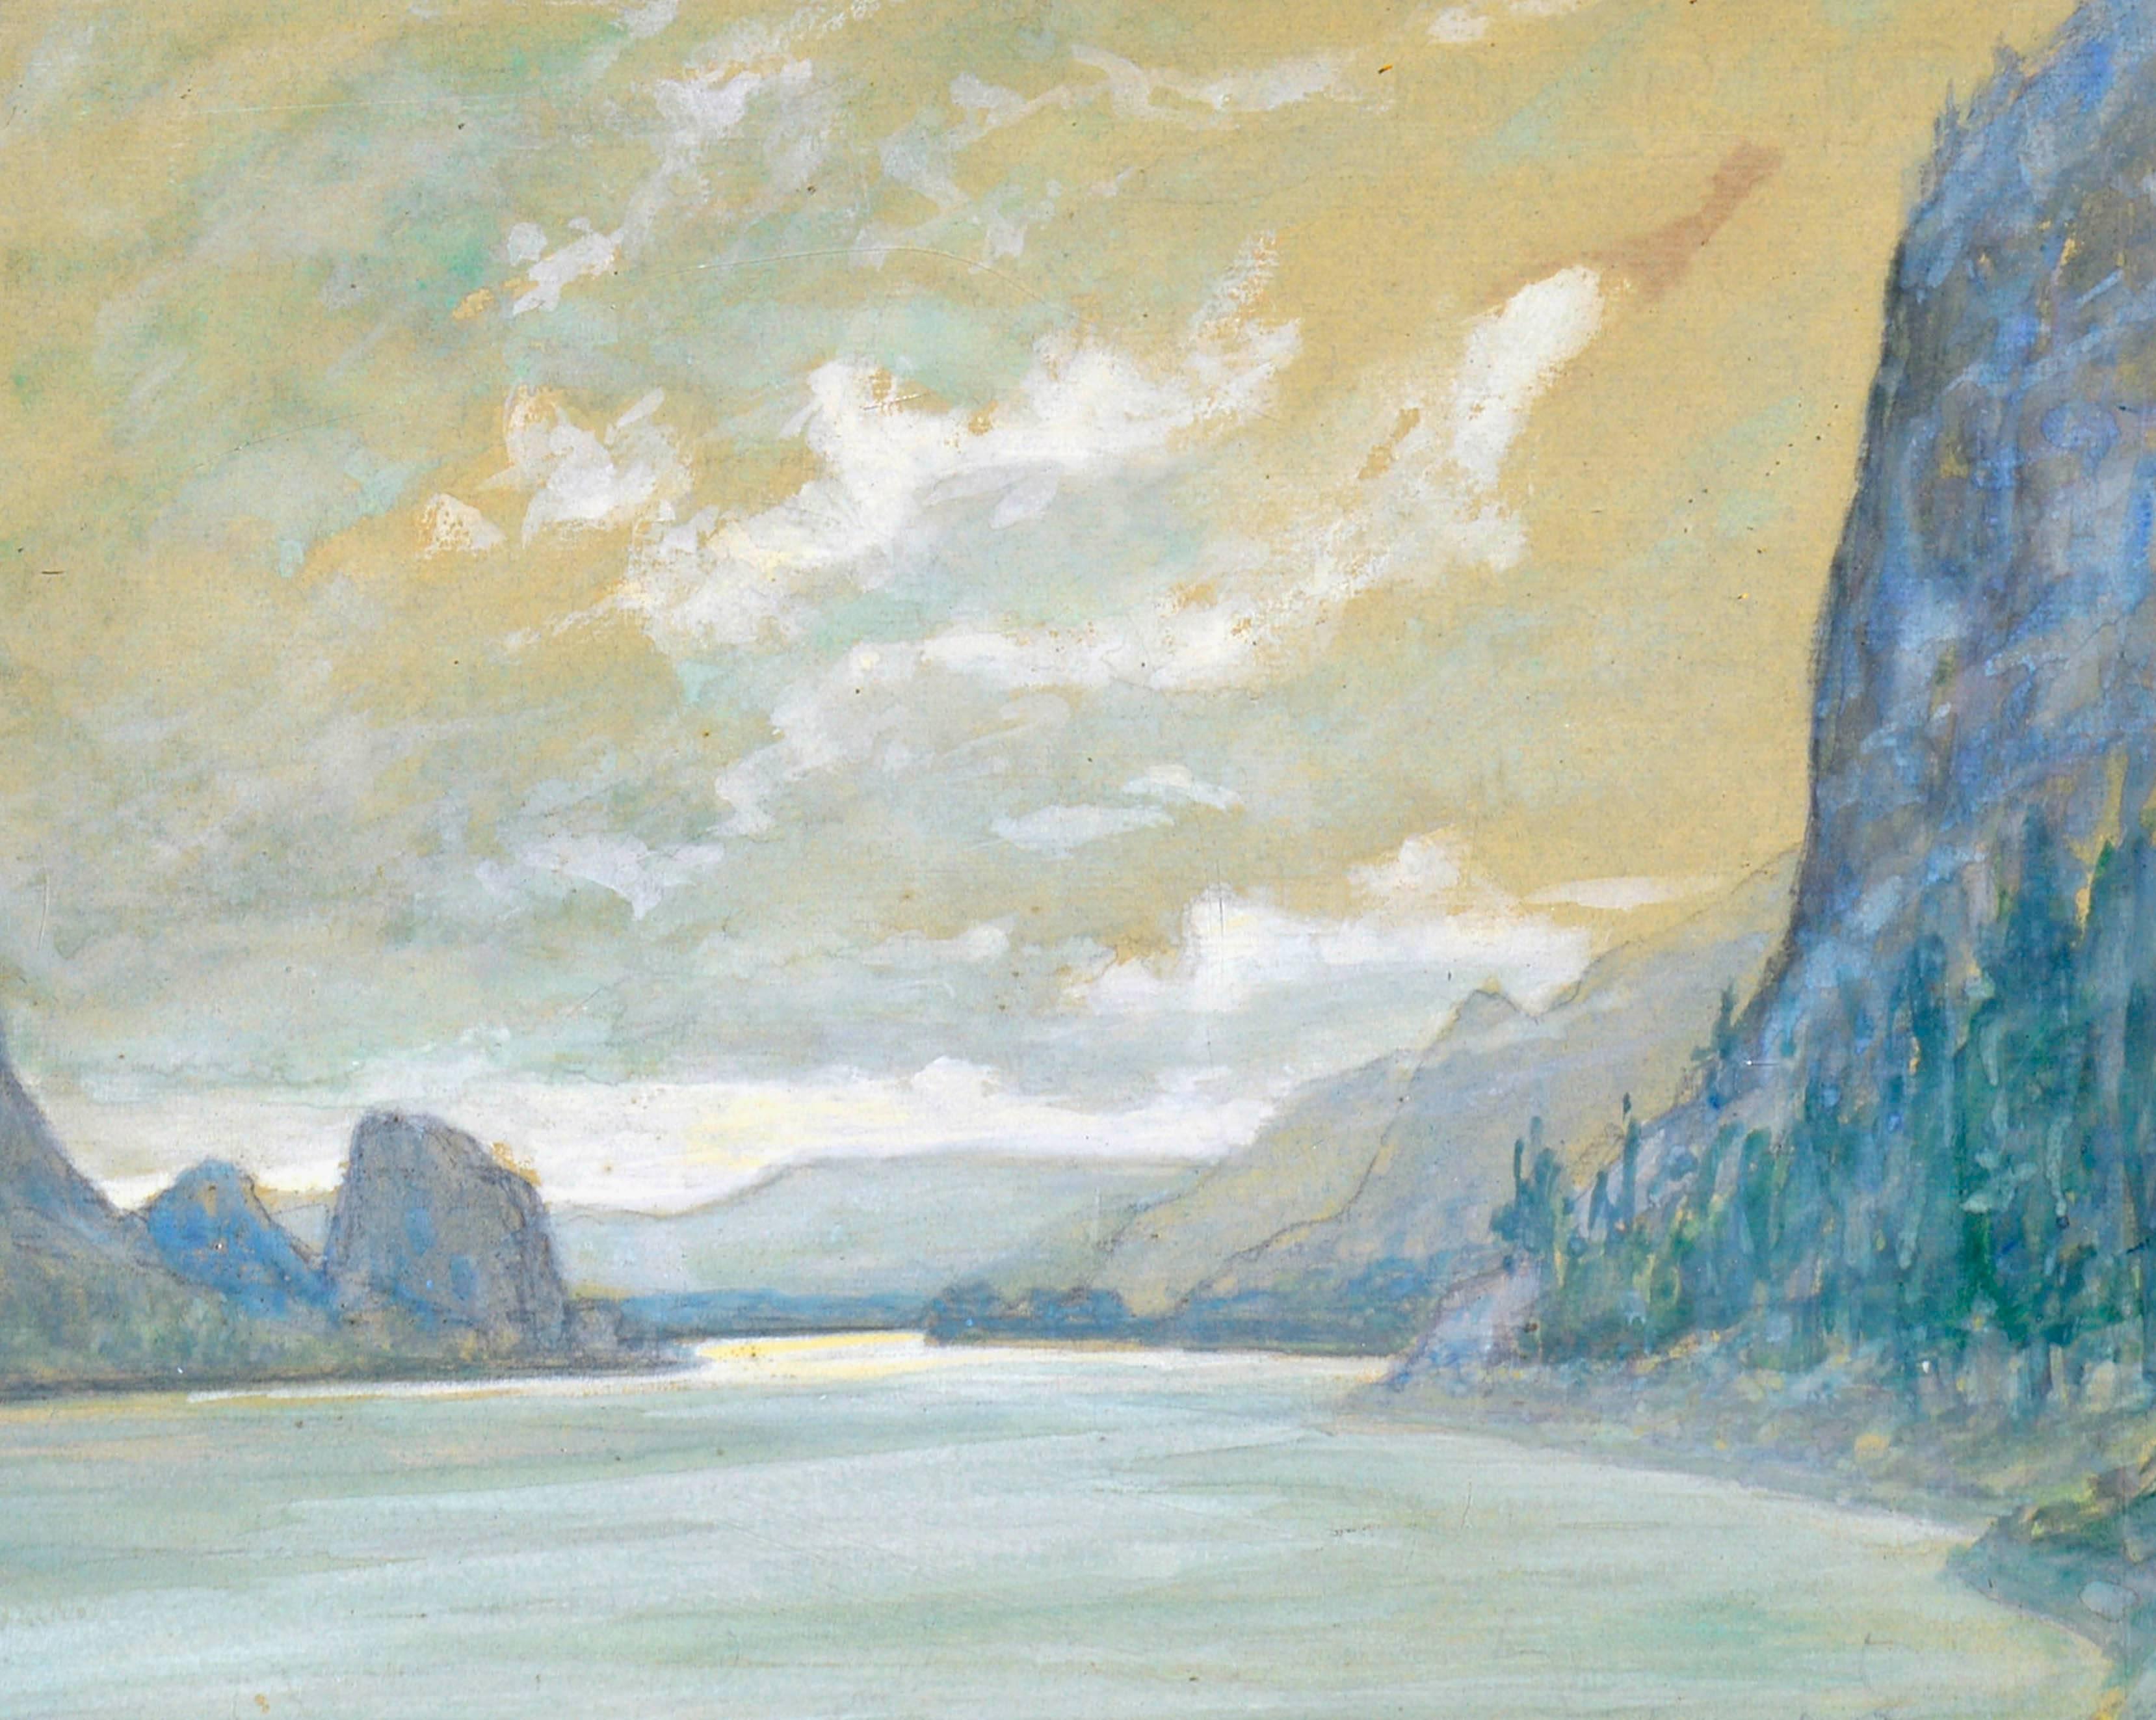  Columbia River Gorge East of Troutdale Oregon - Painting by Clyde Leon Keller